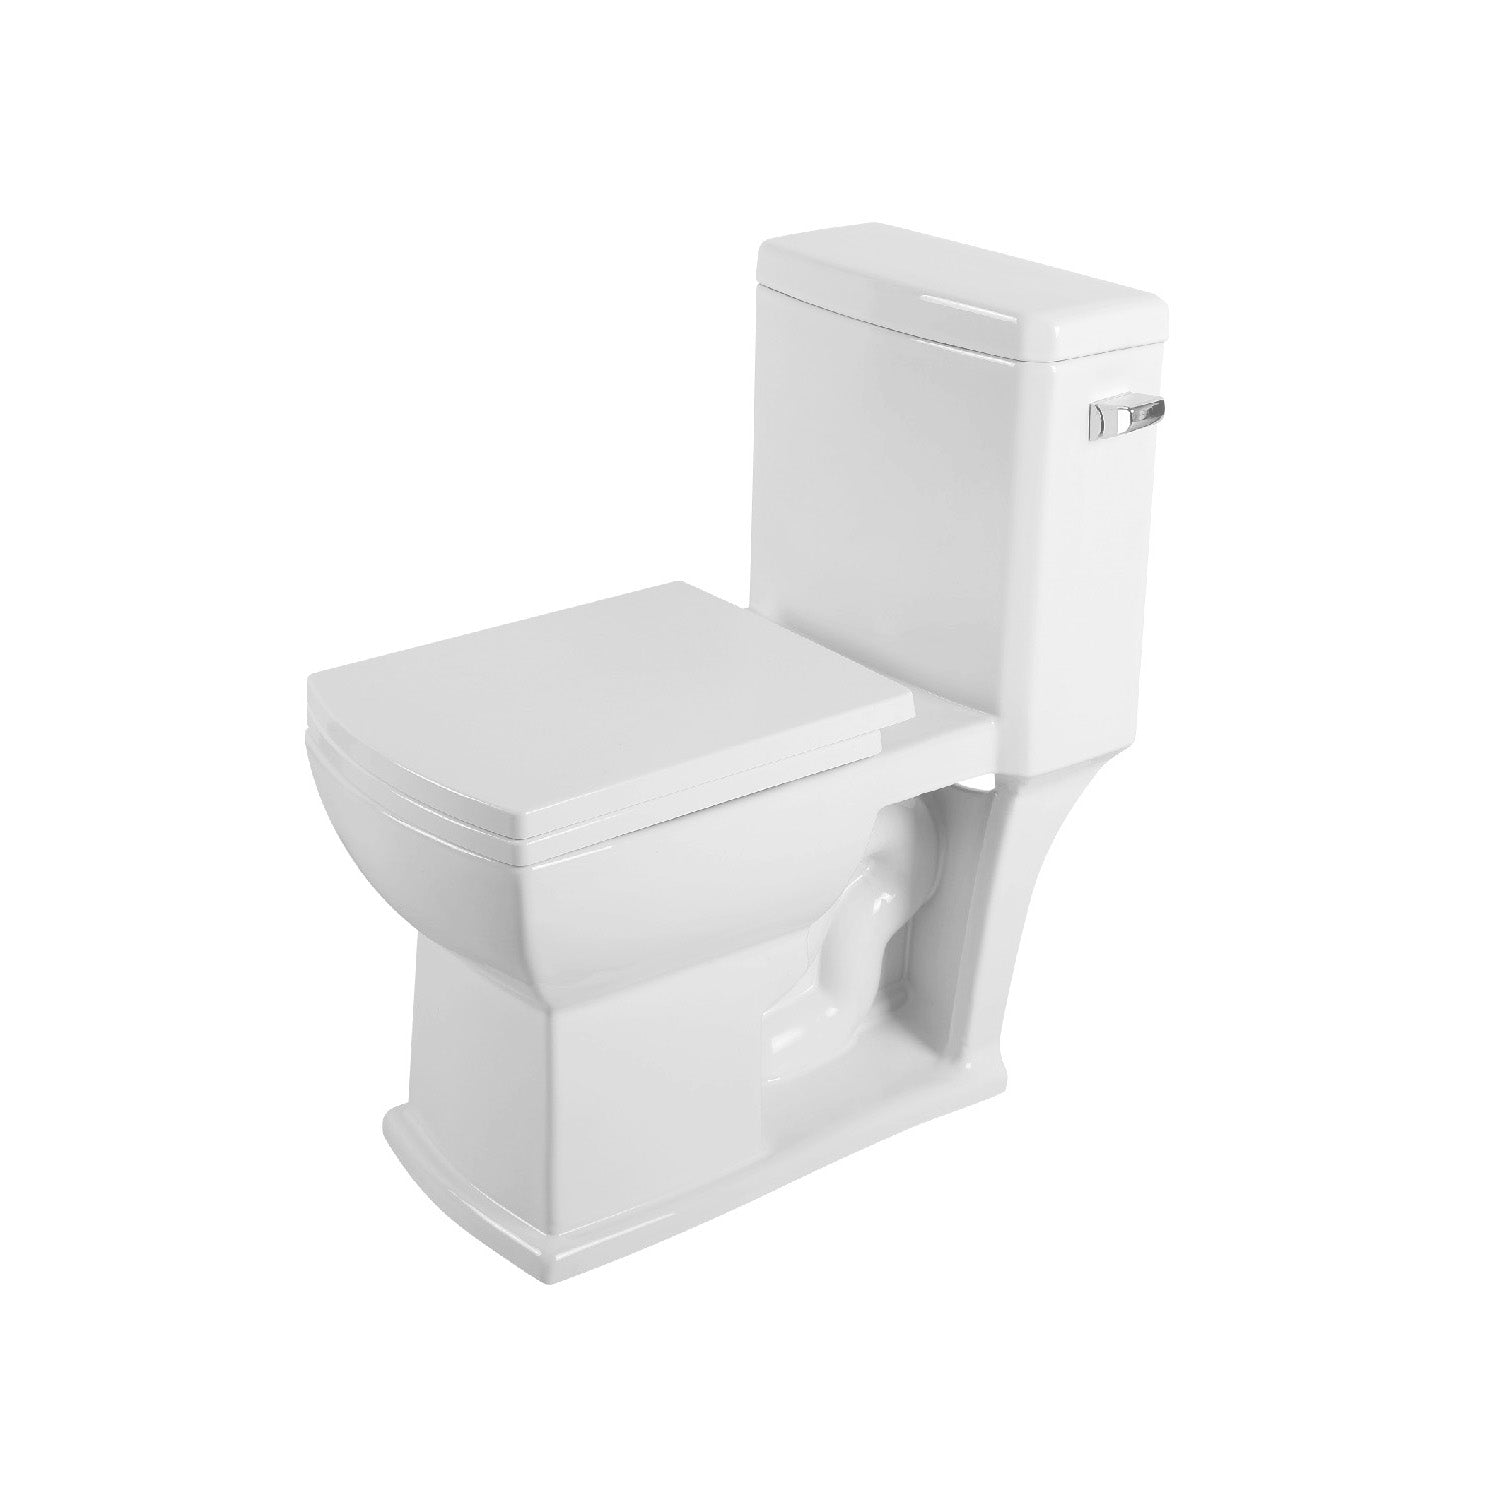 DAX One Piece Square Toilet with Soft Closing Seat and Single Flush High-Efficiency, Porcelain, White Finish, Height 30-1/8 Inches (BSN-105)